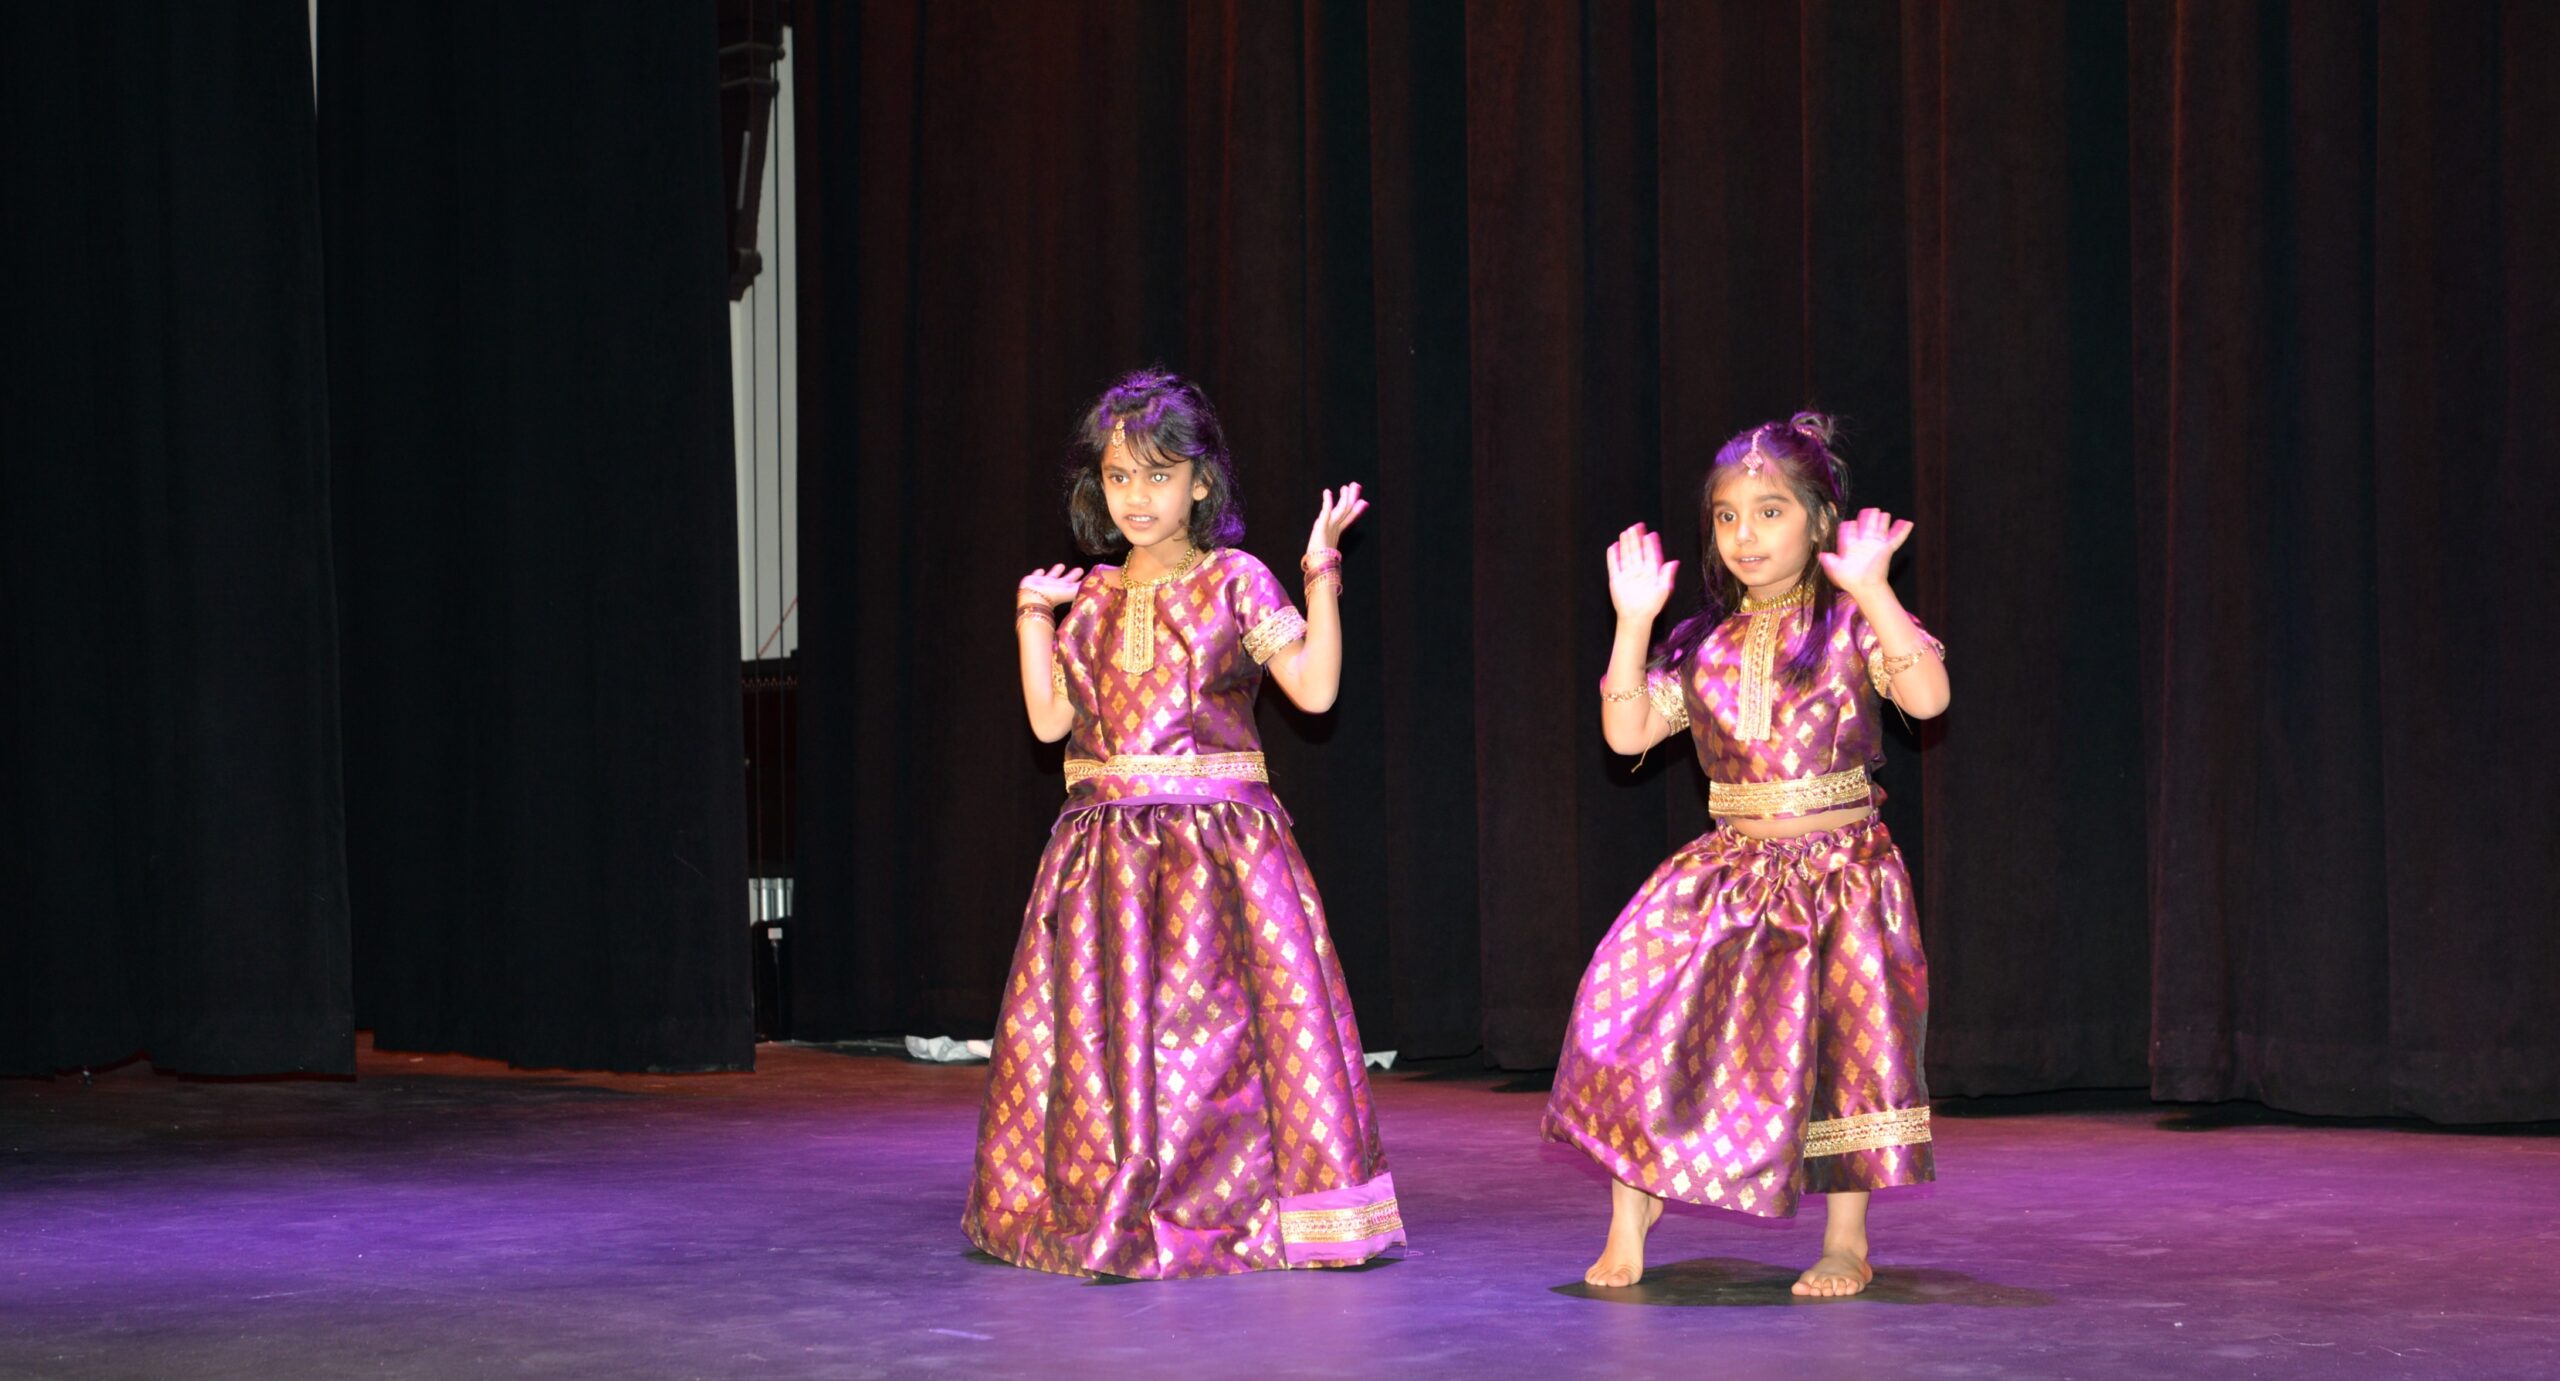 Two young girls dressed in traditional Indian dance costumes perform on stage, their expressions and hand gestures showing concentration and joy during a kids dance performance.